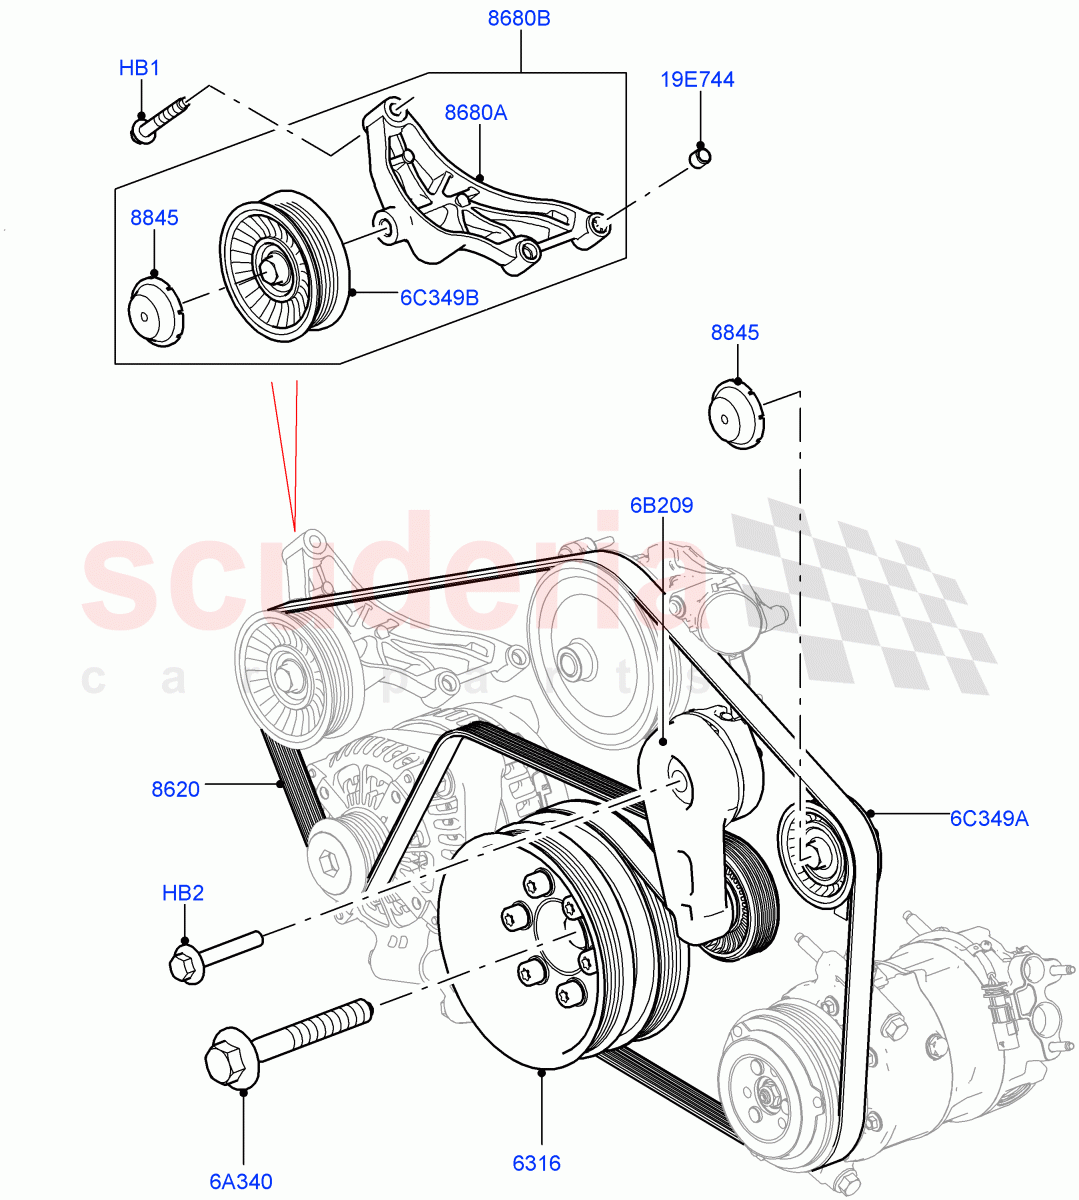 Pulleys And Drive Belts(Primary Drive, Solihull Plant Build)(3.0L DOHC GDI SC V6 PETROL)((V)FROMEA000001) of Land Rover Land Rover Discovery 5 (2017+) [3.0 DOHC GDI SC V6 Petrol]